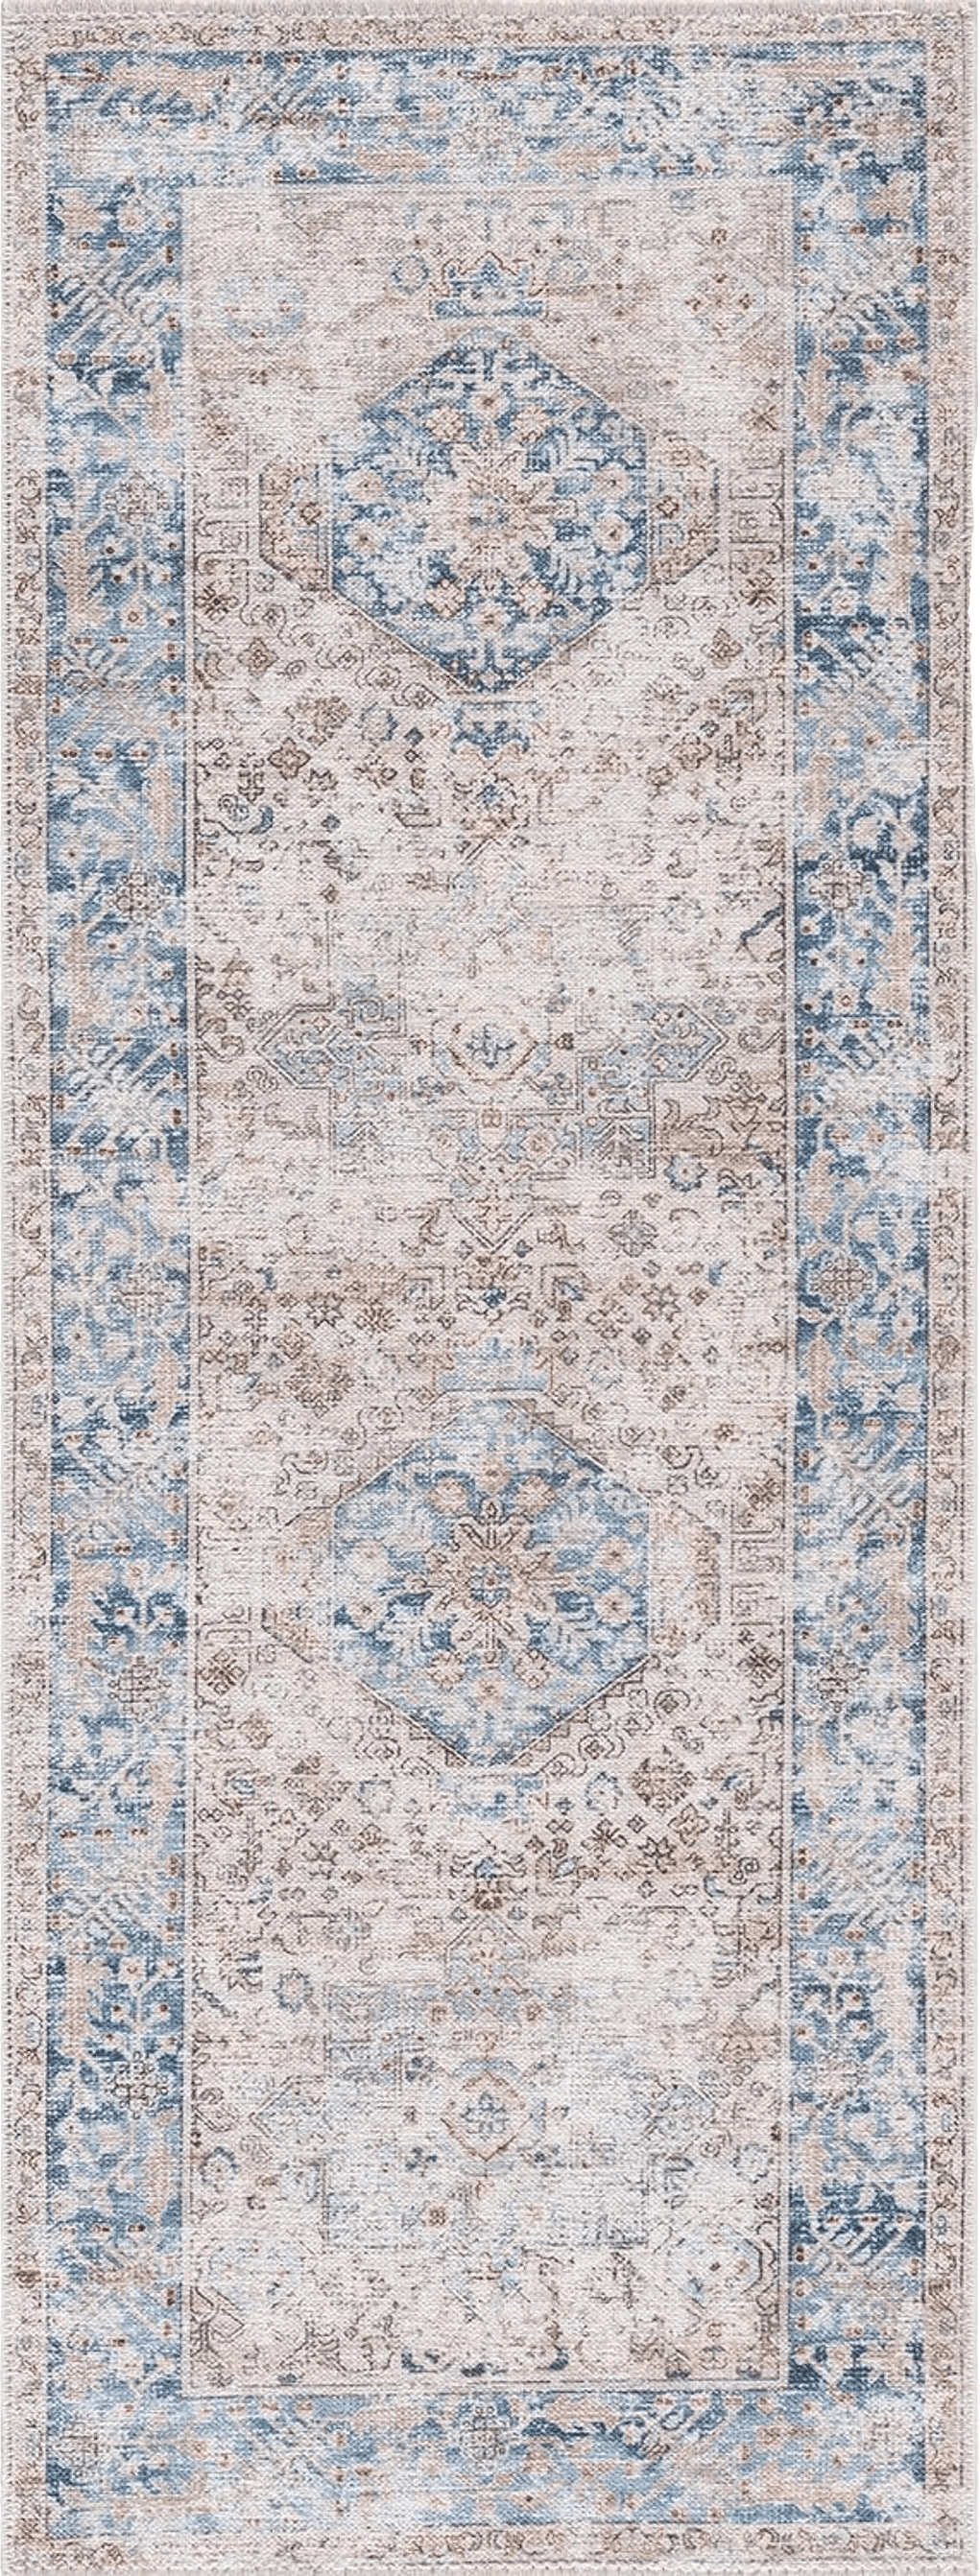 Bloom Rugs Caria Washable Non-Slip 10 ft Runner - Beige/Ocean Blue Runner for Entryway, Hallway, Bathroom and Kitchen - Exact Size: 2'6" x 10'